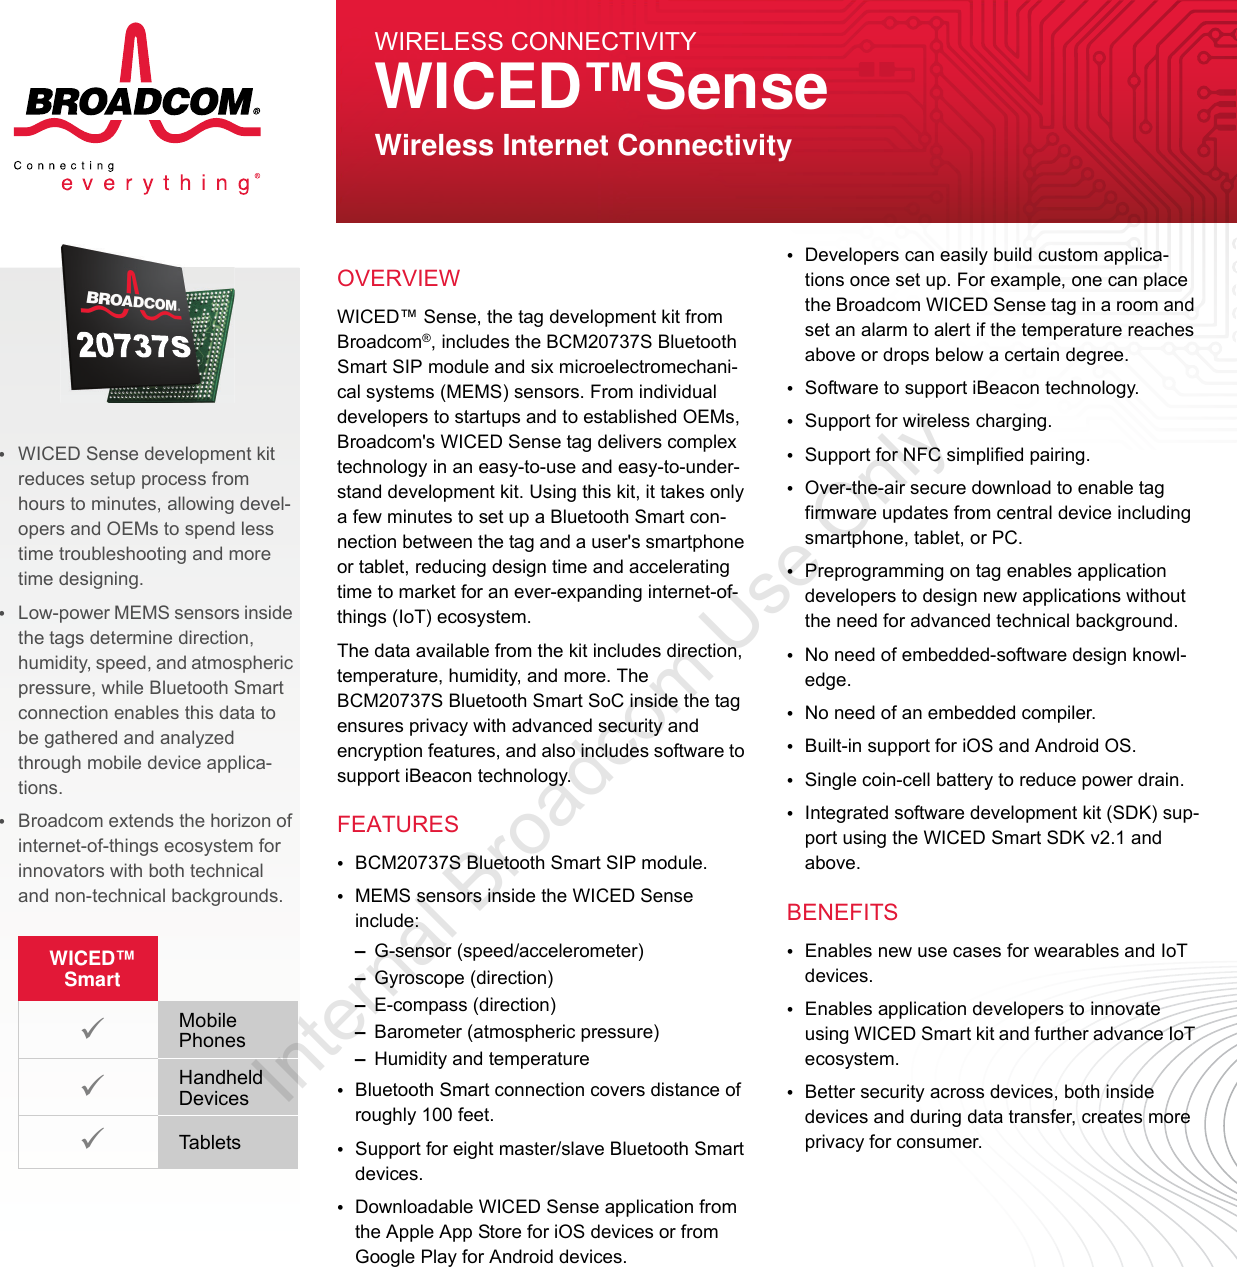 WICED™ Sense, the tag development kit from Broadcom®, includes the BCM20737S Bluetooth Smart SIP module and six microelectromechani-cal systems (MEMS) sensors. From individual developers to startups and to established OEMs, Broadcom&apos;s WICED Sense tag delivers complex technology in an easy-to-use and easy-to-under-stand development kit. Using this kit, it takes only a few minutes to set up a Bluetooth Smart con-nection between the tag and a user&apos;s smartphone or tablet, reducing design time and accelerating time to market for an ever-expanding internet-of-things (IoT) ecosystem. The data available from the kit includes direction, temperature, humidity, and more. The BCM20737S Bluetooth Smart SoC inside the tag ensures privacy with advanced security and encryption features, and also includes software to support iBeacon technology. •BCM20737S Bluetooth Smart SIP module.•MEMS sensors inside the WICED Sense include:–G-sensor (speed/accelerometer)–Gyroscope (direction)–E-compass (direction)–Barometer (atmospheric pressure)–Humidity and temperature •Bluetooth Smart connection covers distance of roughly 100 feet.•Support for eight master/slave Bluetooth Smart devices.•Downloadable WICED Sense application from the Apple App Store for iOS devices or from Google Play for Android devices.•Developers can easily build custom applica-tions once set up. For example, one can place the Broadcom WICED Sense tag in a room and set an alarm to alert if the temperature reaches above or drops below a certain degree.•Software to support iBeacon technology.•Support for wireless charging.•Support for NFC simplified pairing.•Over-the-air secure download to enable tag firmware updates from central device including smartphone, tablet, or PC. •Preprogramming on tag enables application developers to design new applications without the need for advanced technical background.•No need of embedded-software design knowl-edge.•No need of an embedded compiler. •Built-in support for iOS and Android OS. •Single coin-cell battery to reduce power drain.•Integrated software development kit (SDK) sup-port using the WICED Smart SDK v2.1 and above. •Enables new use cases for wearables and IoT devices.•Enables application developers to innovate using WICED Smart kit and further advance IoT ecosystem.•Better security across devices, both inside devices and during data transfer, creates more privacy for consumer. OVERVIEWFEATURESBENEFITSWIRELESS CONNECTIVITYWICED™SenseWireless Internet Connectivity•WICED Sense development kit reduces setup process from hours to minutes, allowing devel-opers and OEMs to spend less time troubleshooting and more time designing.•Low-power MEMS sensors inside the tags determine direction, humidity, speed, and atmospheric pressure, while Bluetooth Smart connection enables this data to be gathered and analyzed through mobile device applica-tions.•Broadcom extends the horizon of internet-of-things ecosystem for innovators with both technical and non-technical backgrounds.WICED™ SmartMobile PhonesHandheld DevicesTablets Internal Broadcom Use Only